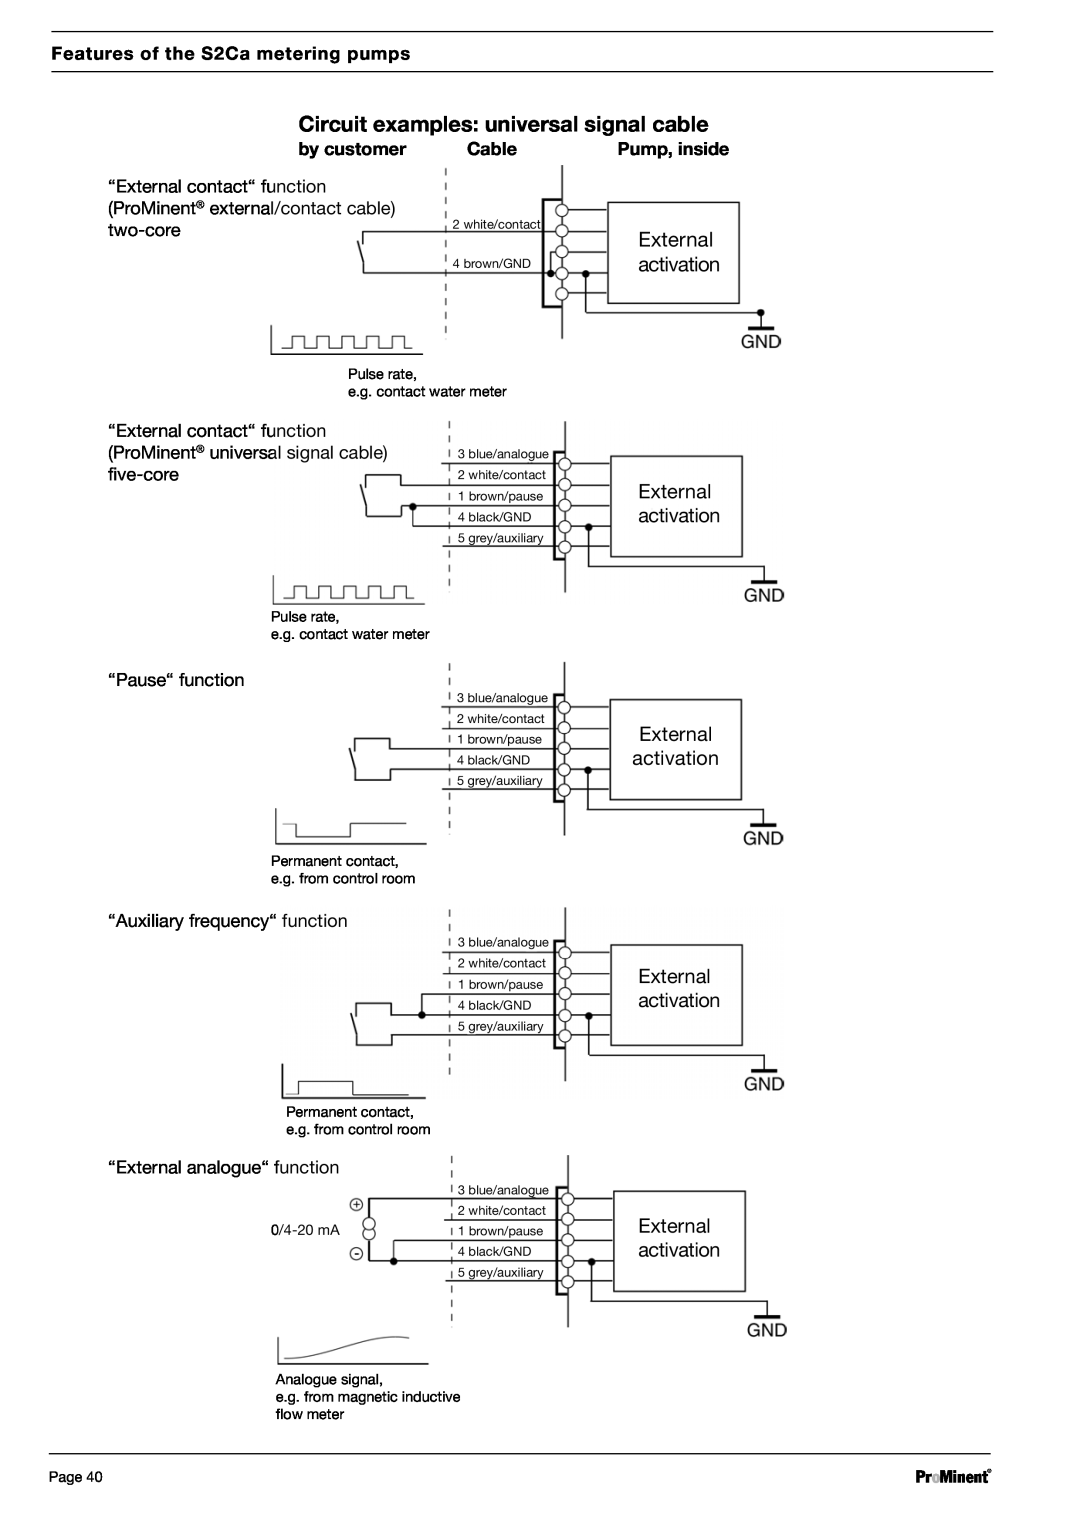 Sigma S2Ba, S2Ca Circuit examples: universal signal cable, External activation External activation, by customer, Cable 